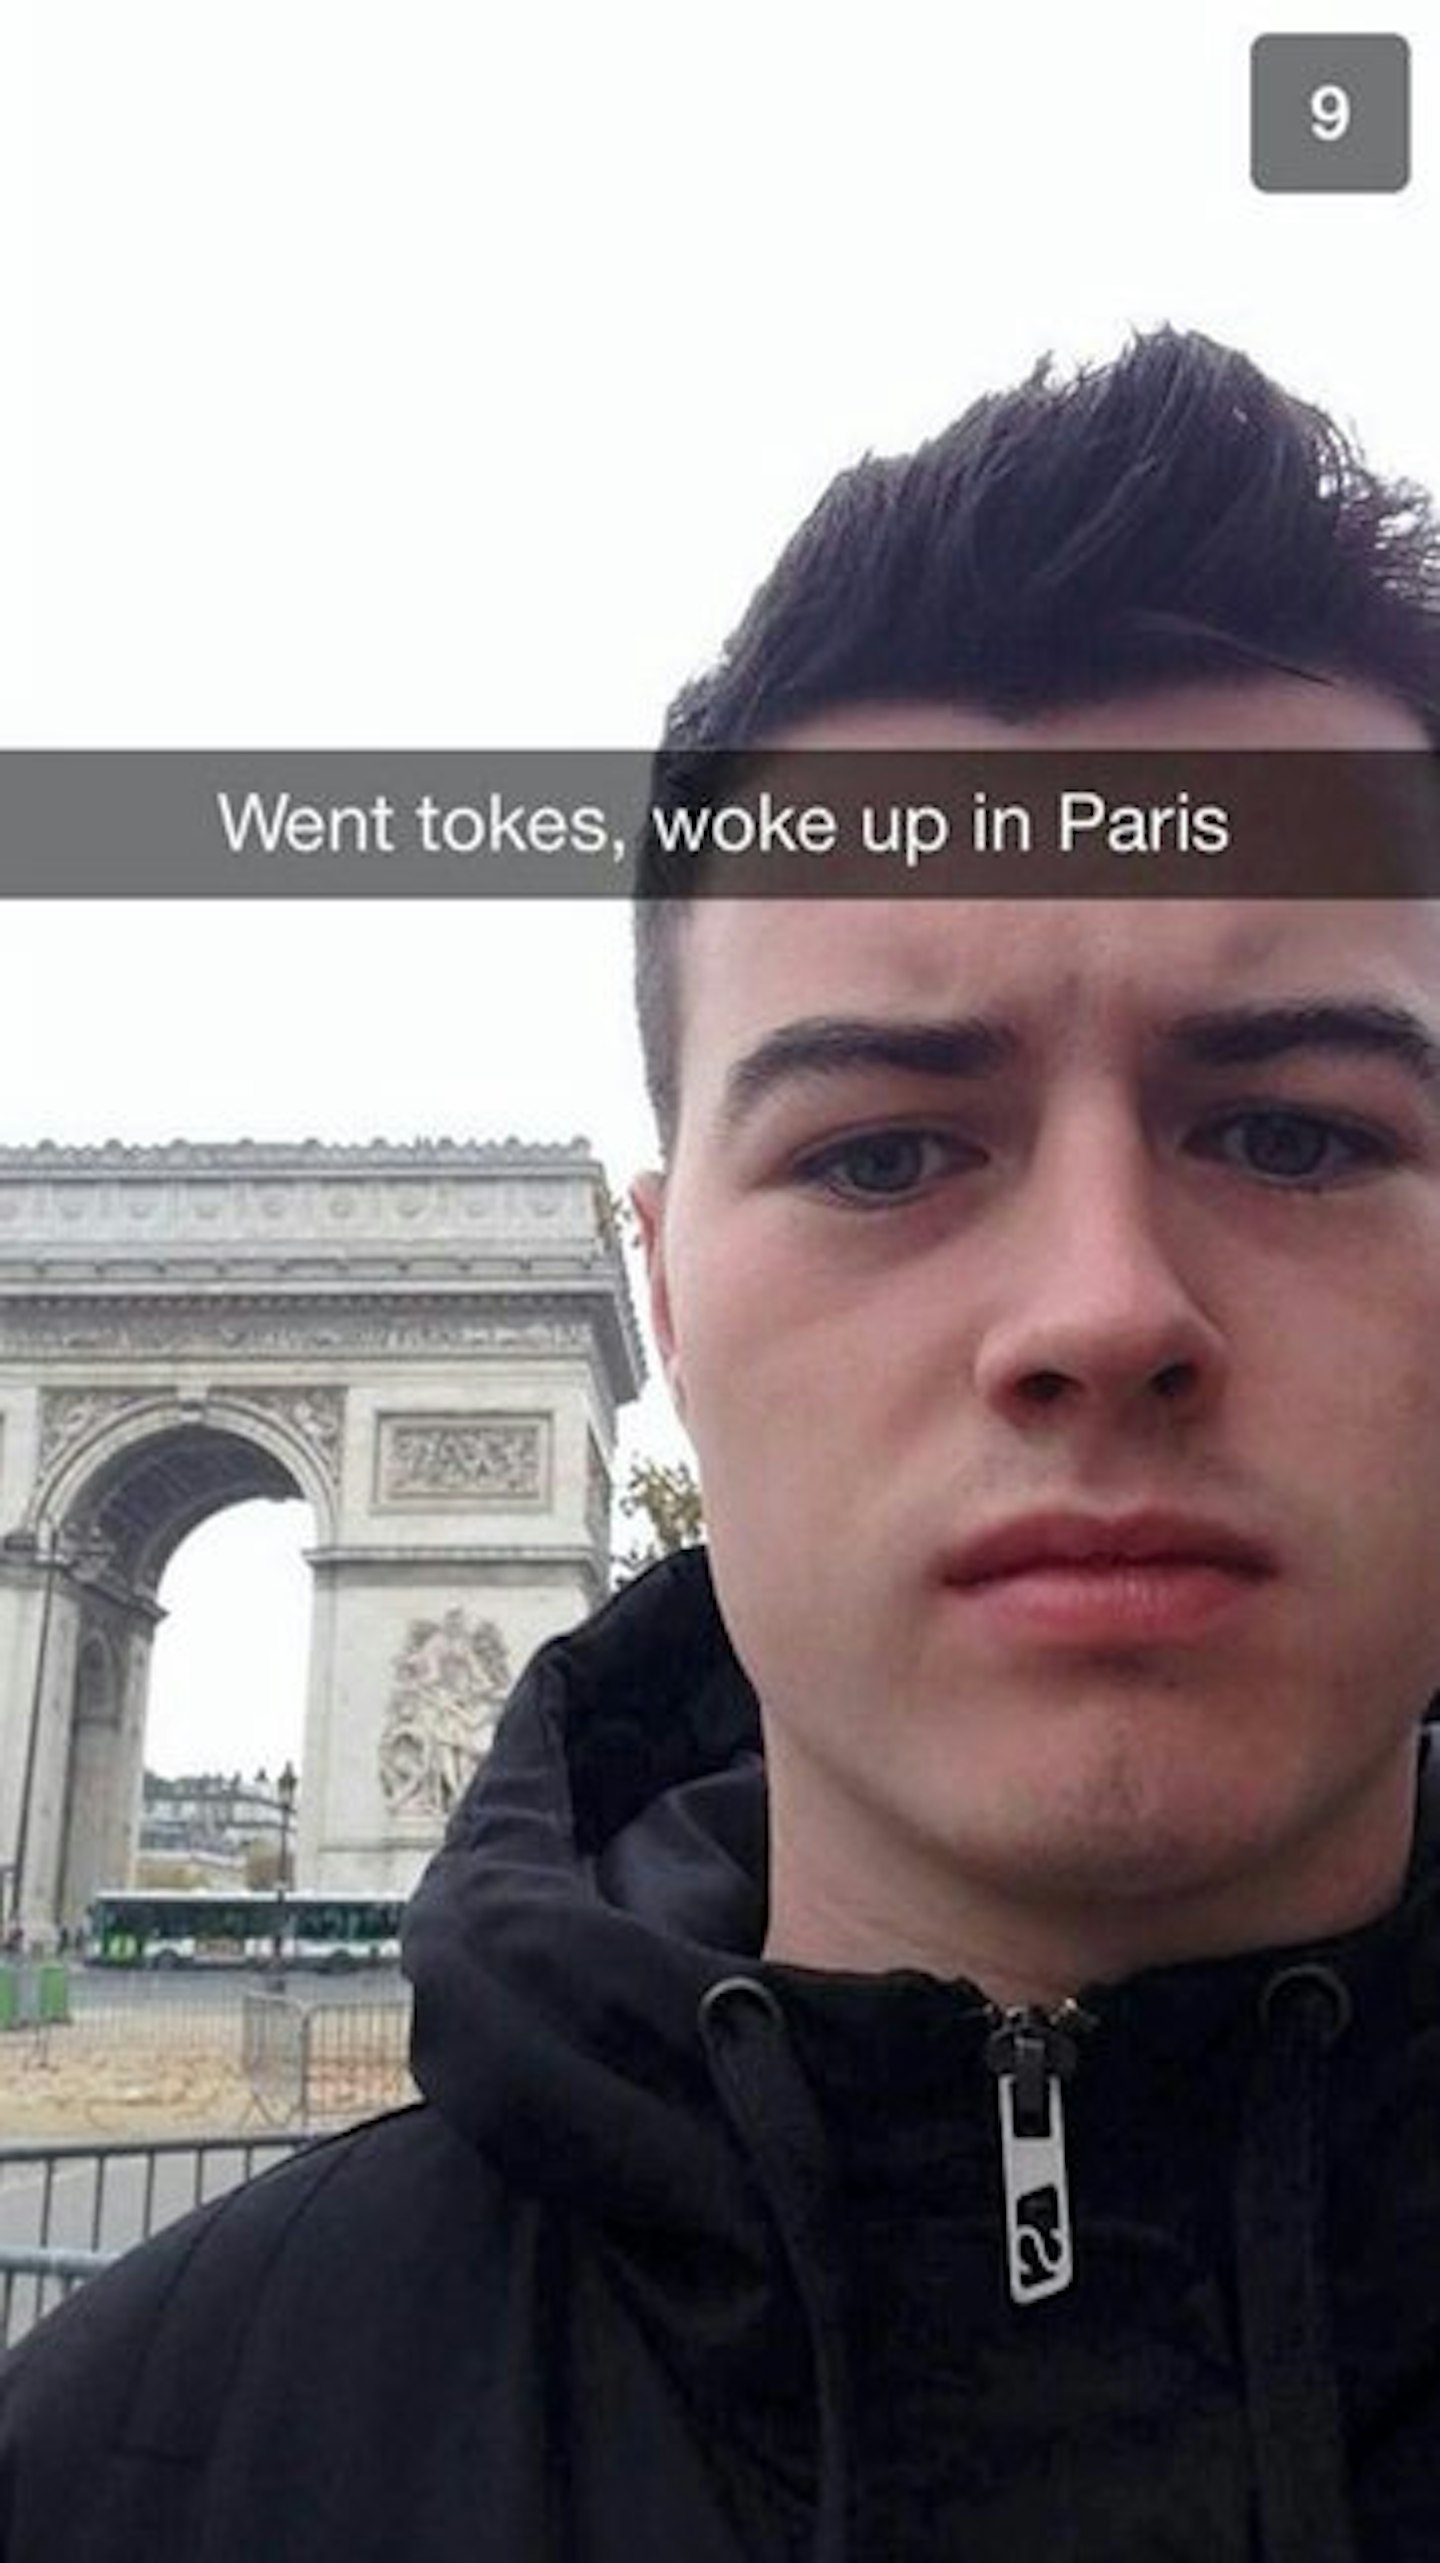 Luke sent this picture of him in Paris after waking up there following a drunken night in Manchester